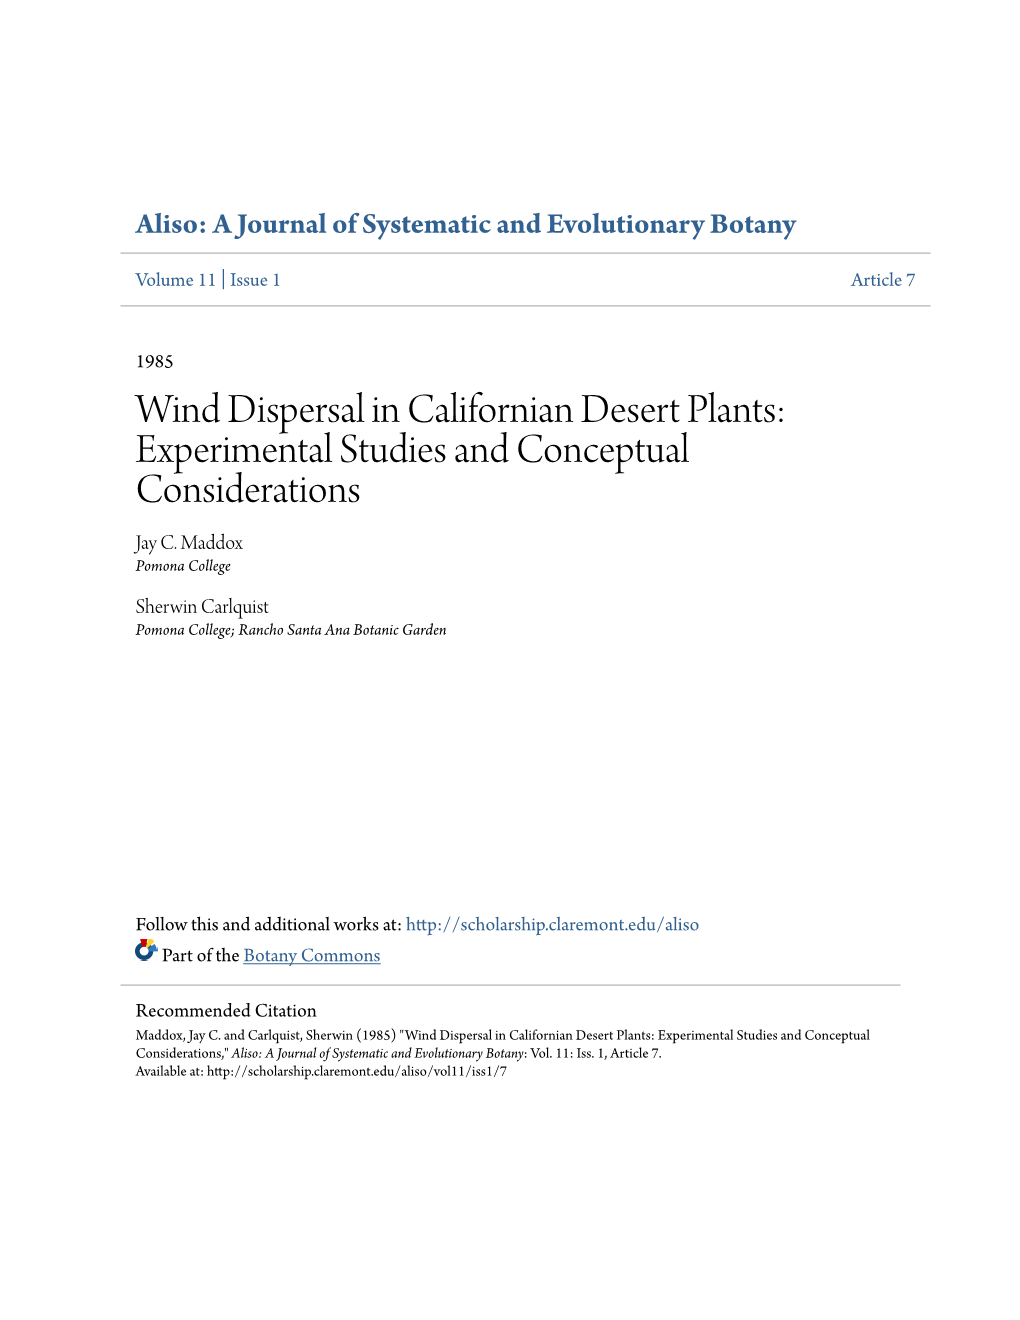 Wind Dispersal in Californian Desert Plants: Experimental Studies and Conceptual Considerations Jay C